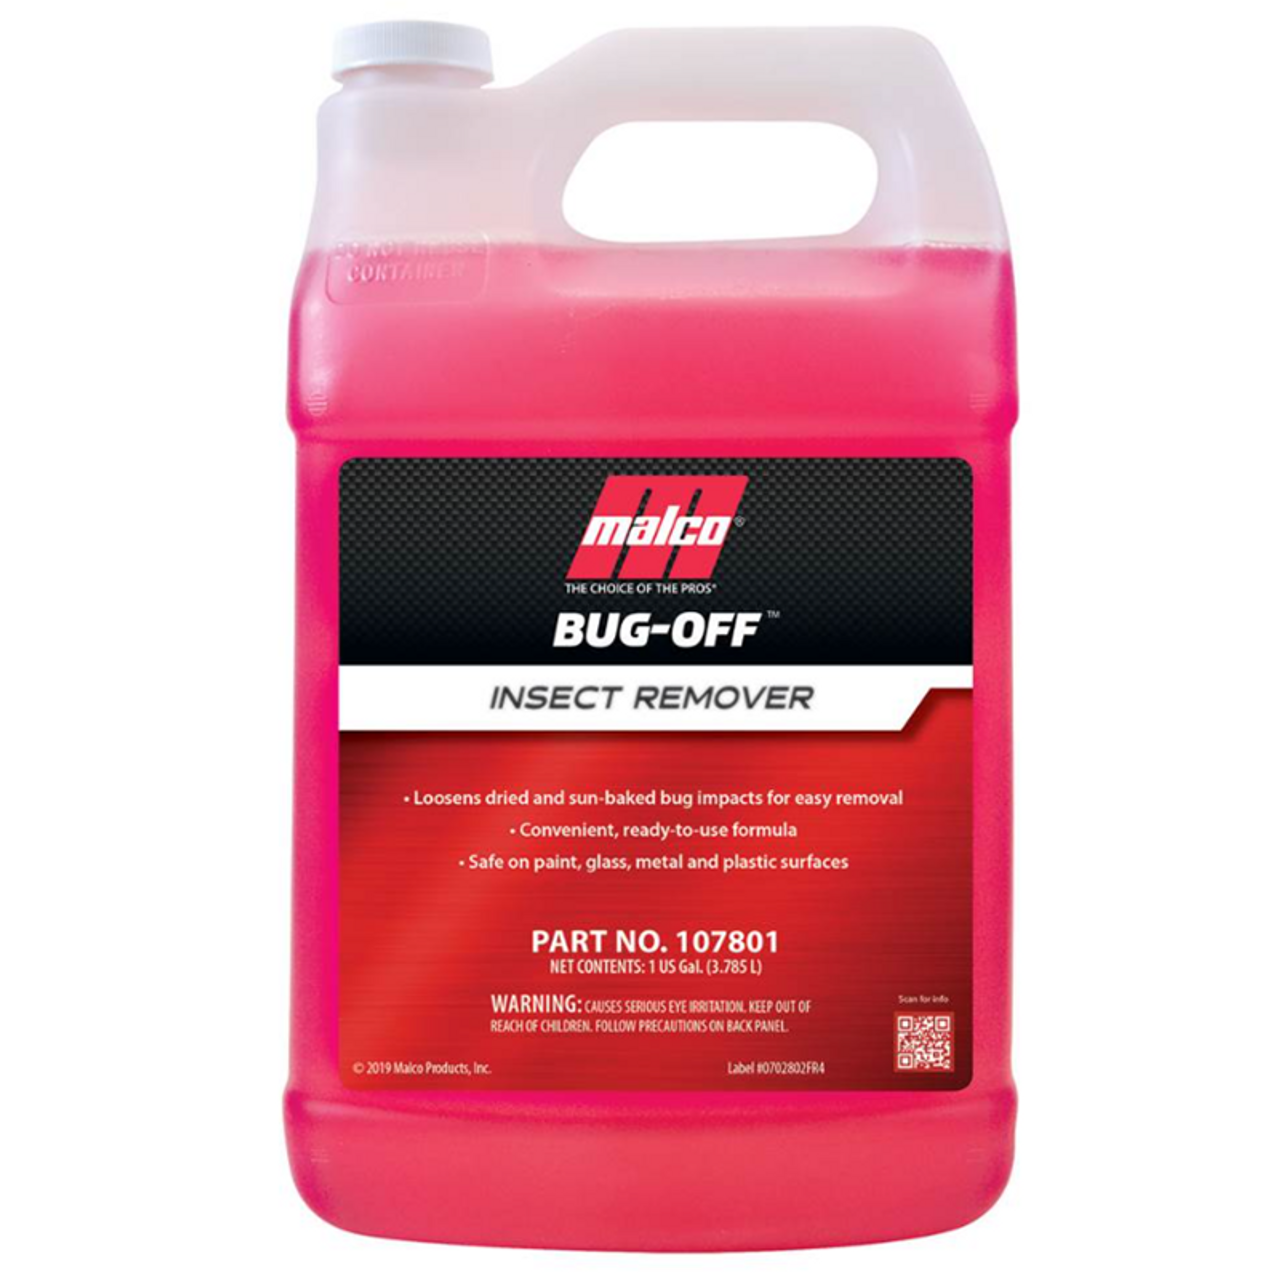 Malco Bug-Off™ Insect Remover